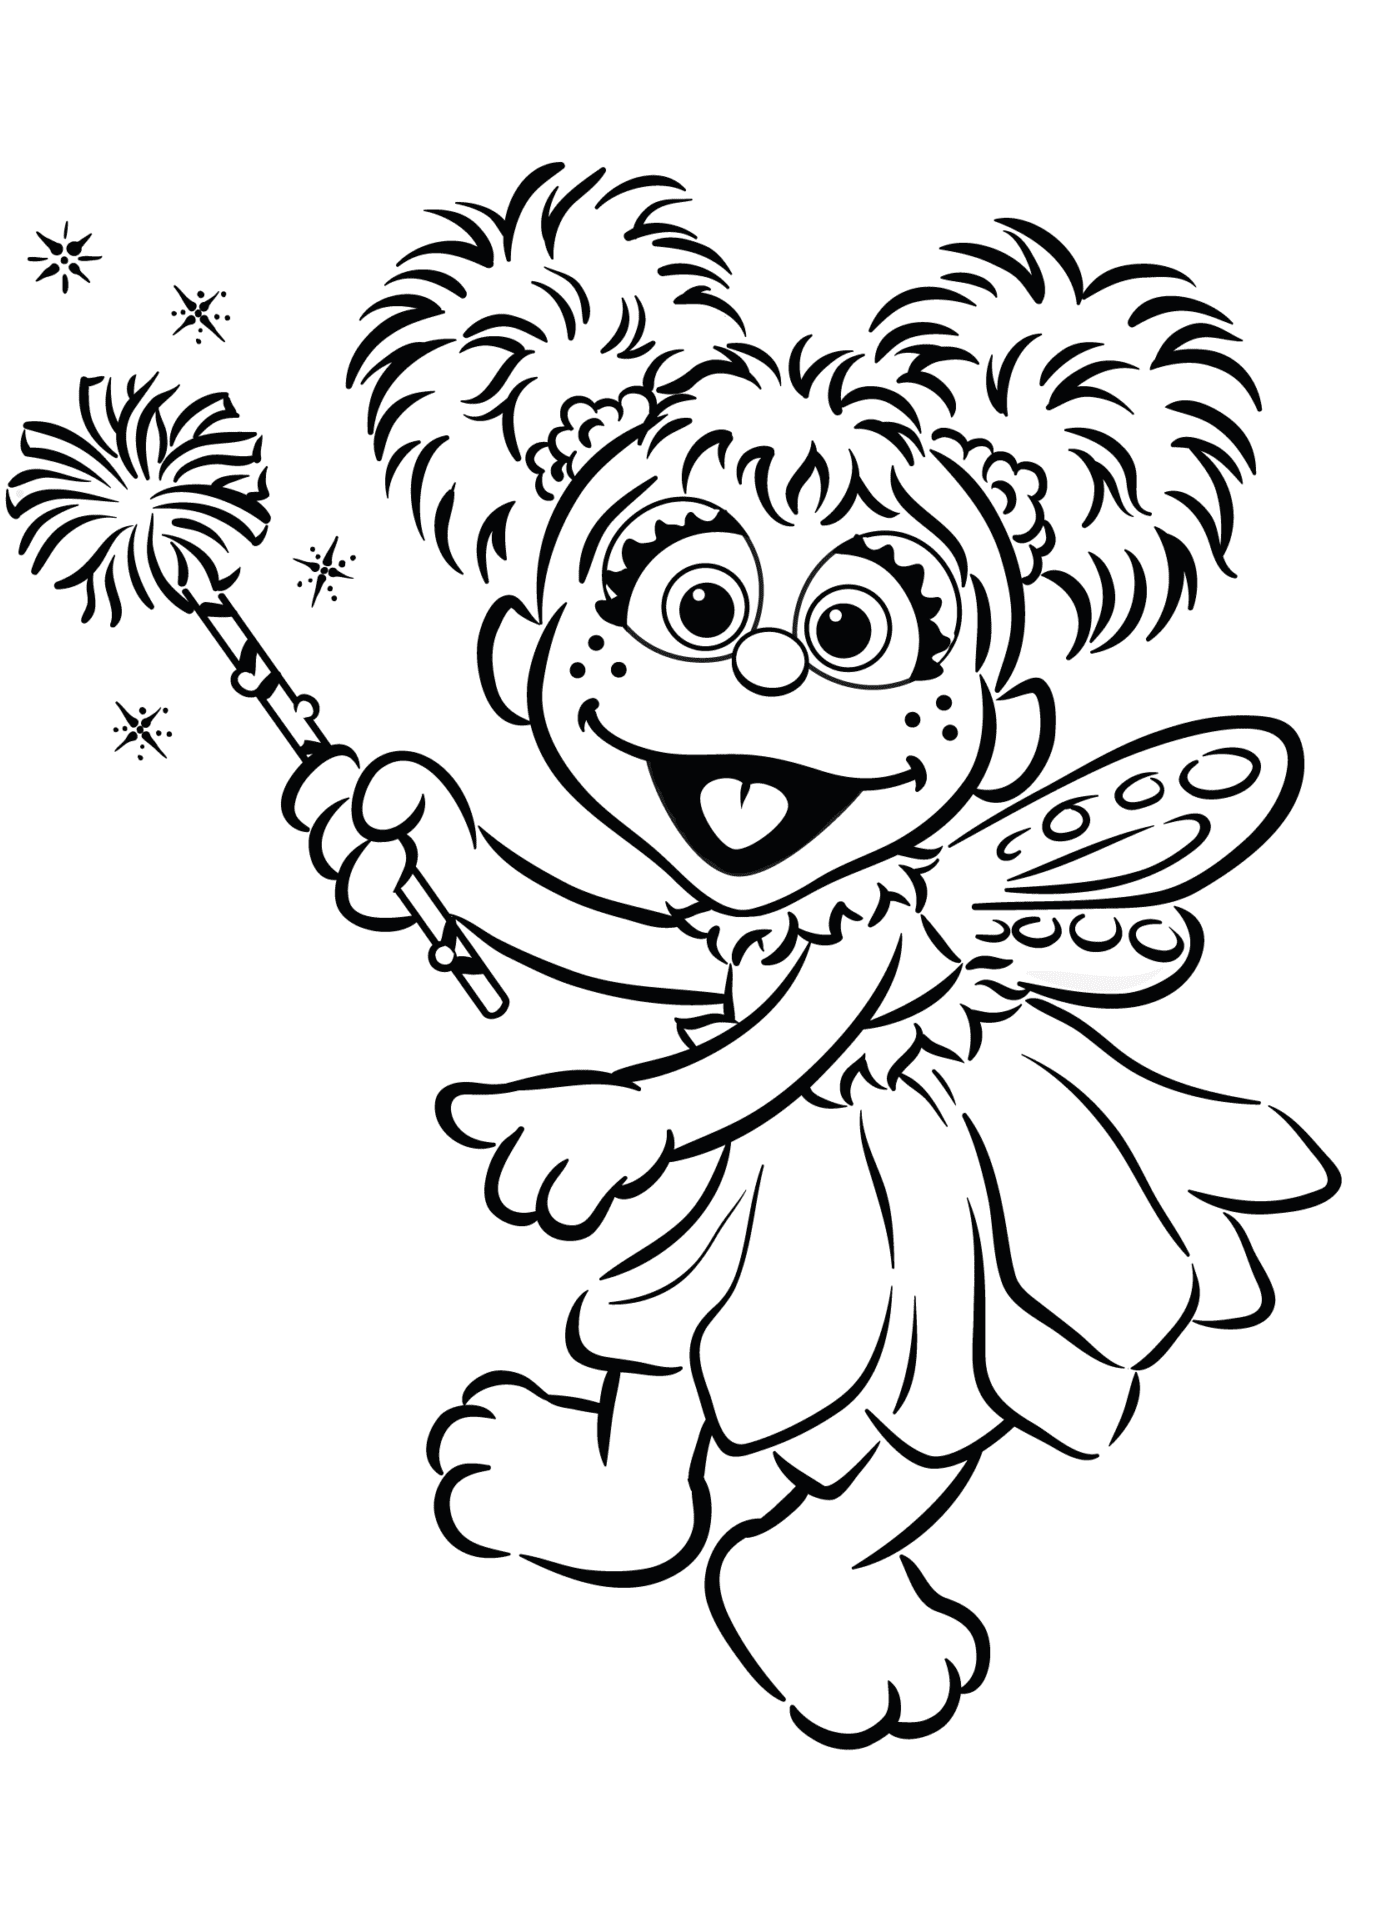 Abby Cadabby Coloring Pages Pdf to Print - Printable Abby Cadabby Coloring Pages